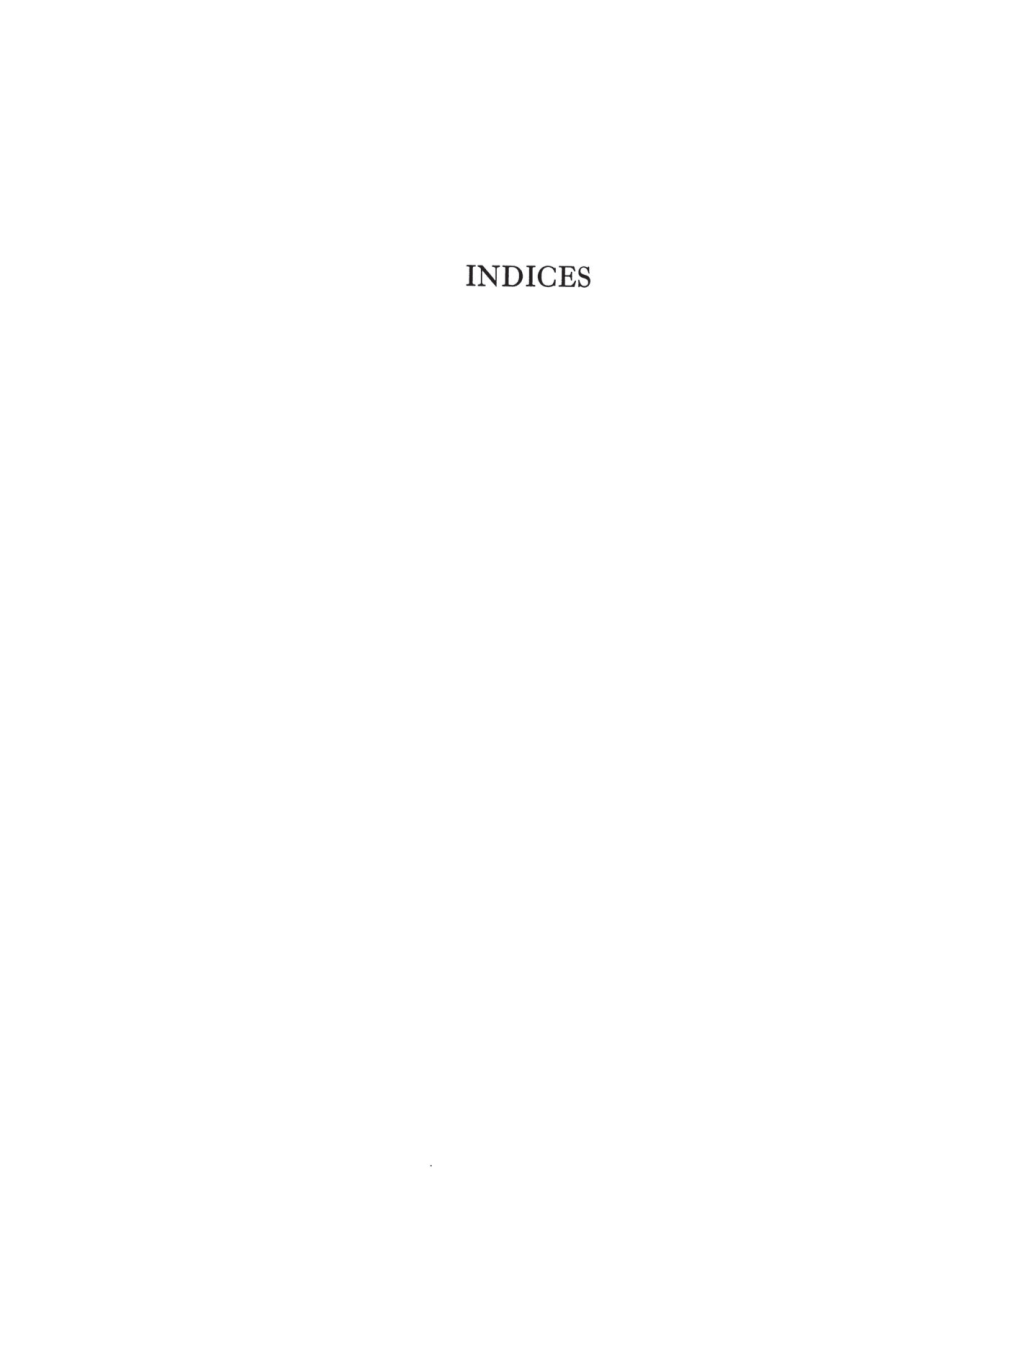 Indices General Index of Masters